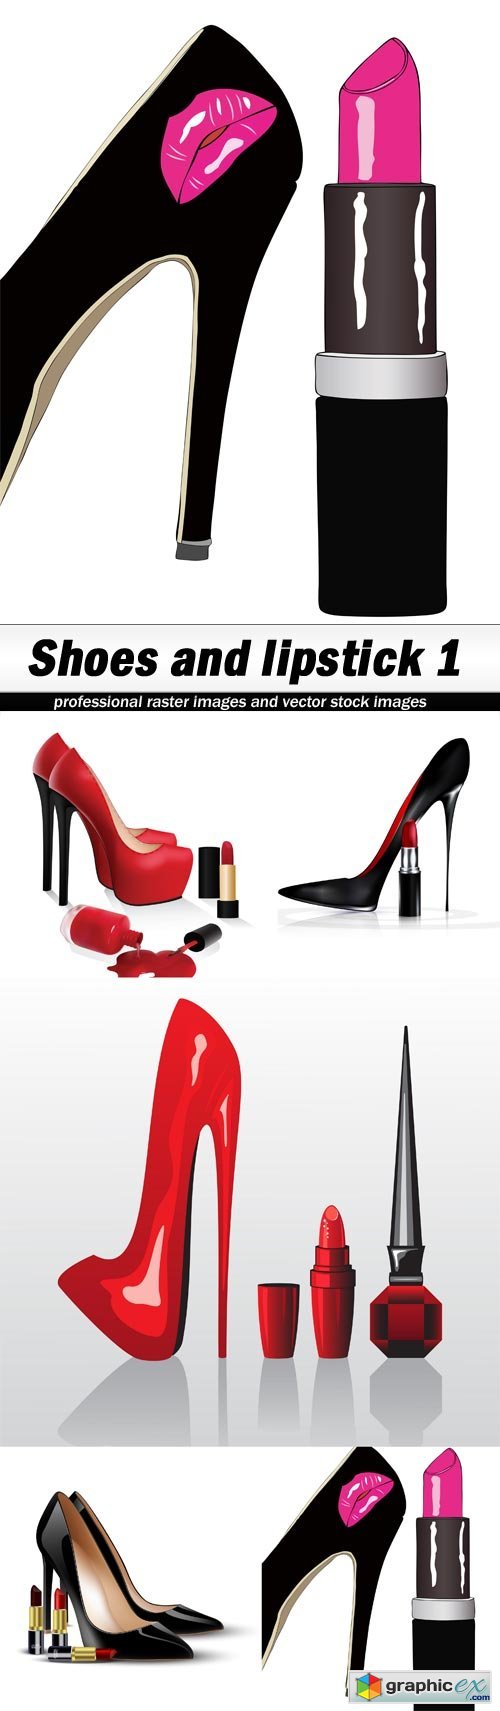 Shoes and lipstick 1 - 5 EPS